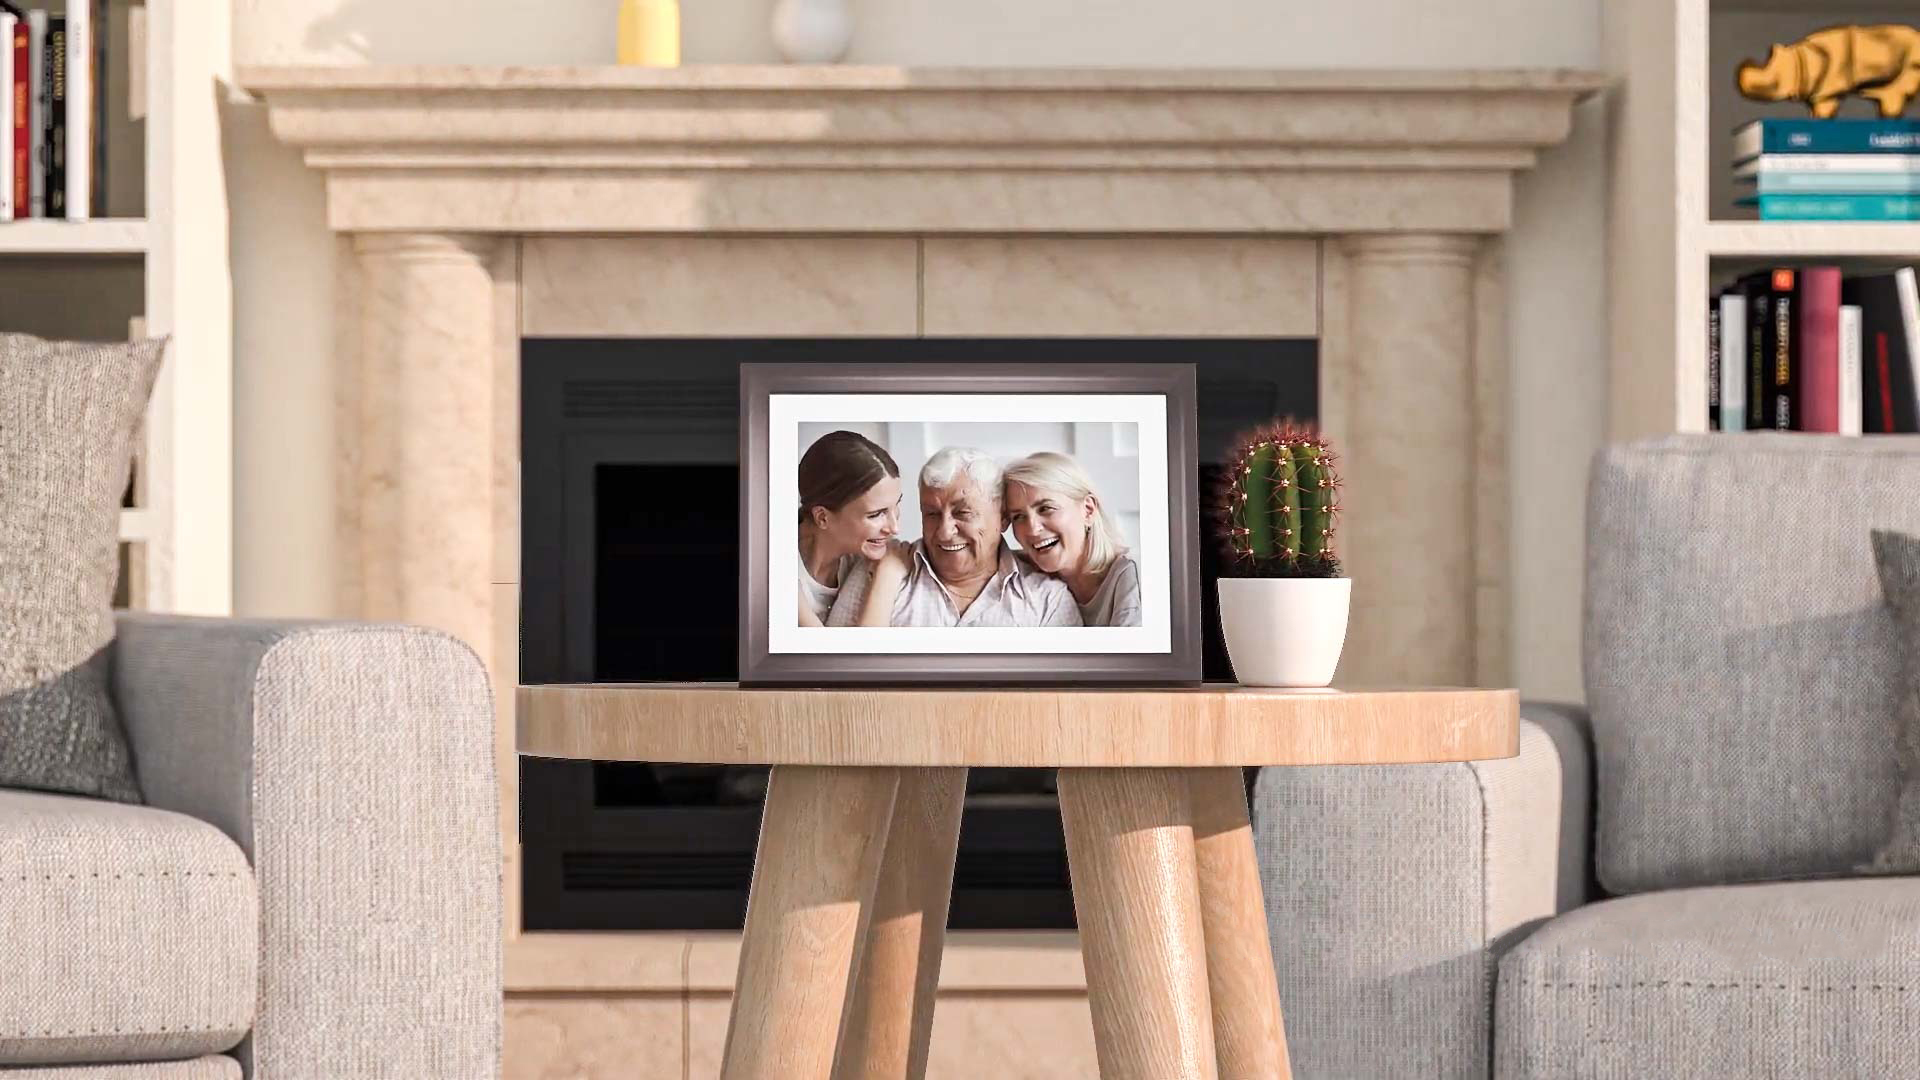 Dragon Touch Battery-powered Digital Picture Frame with Wi-Fi